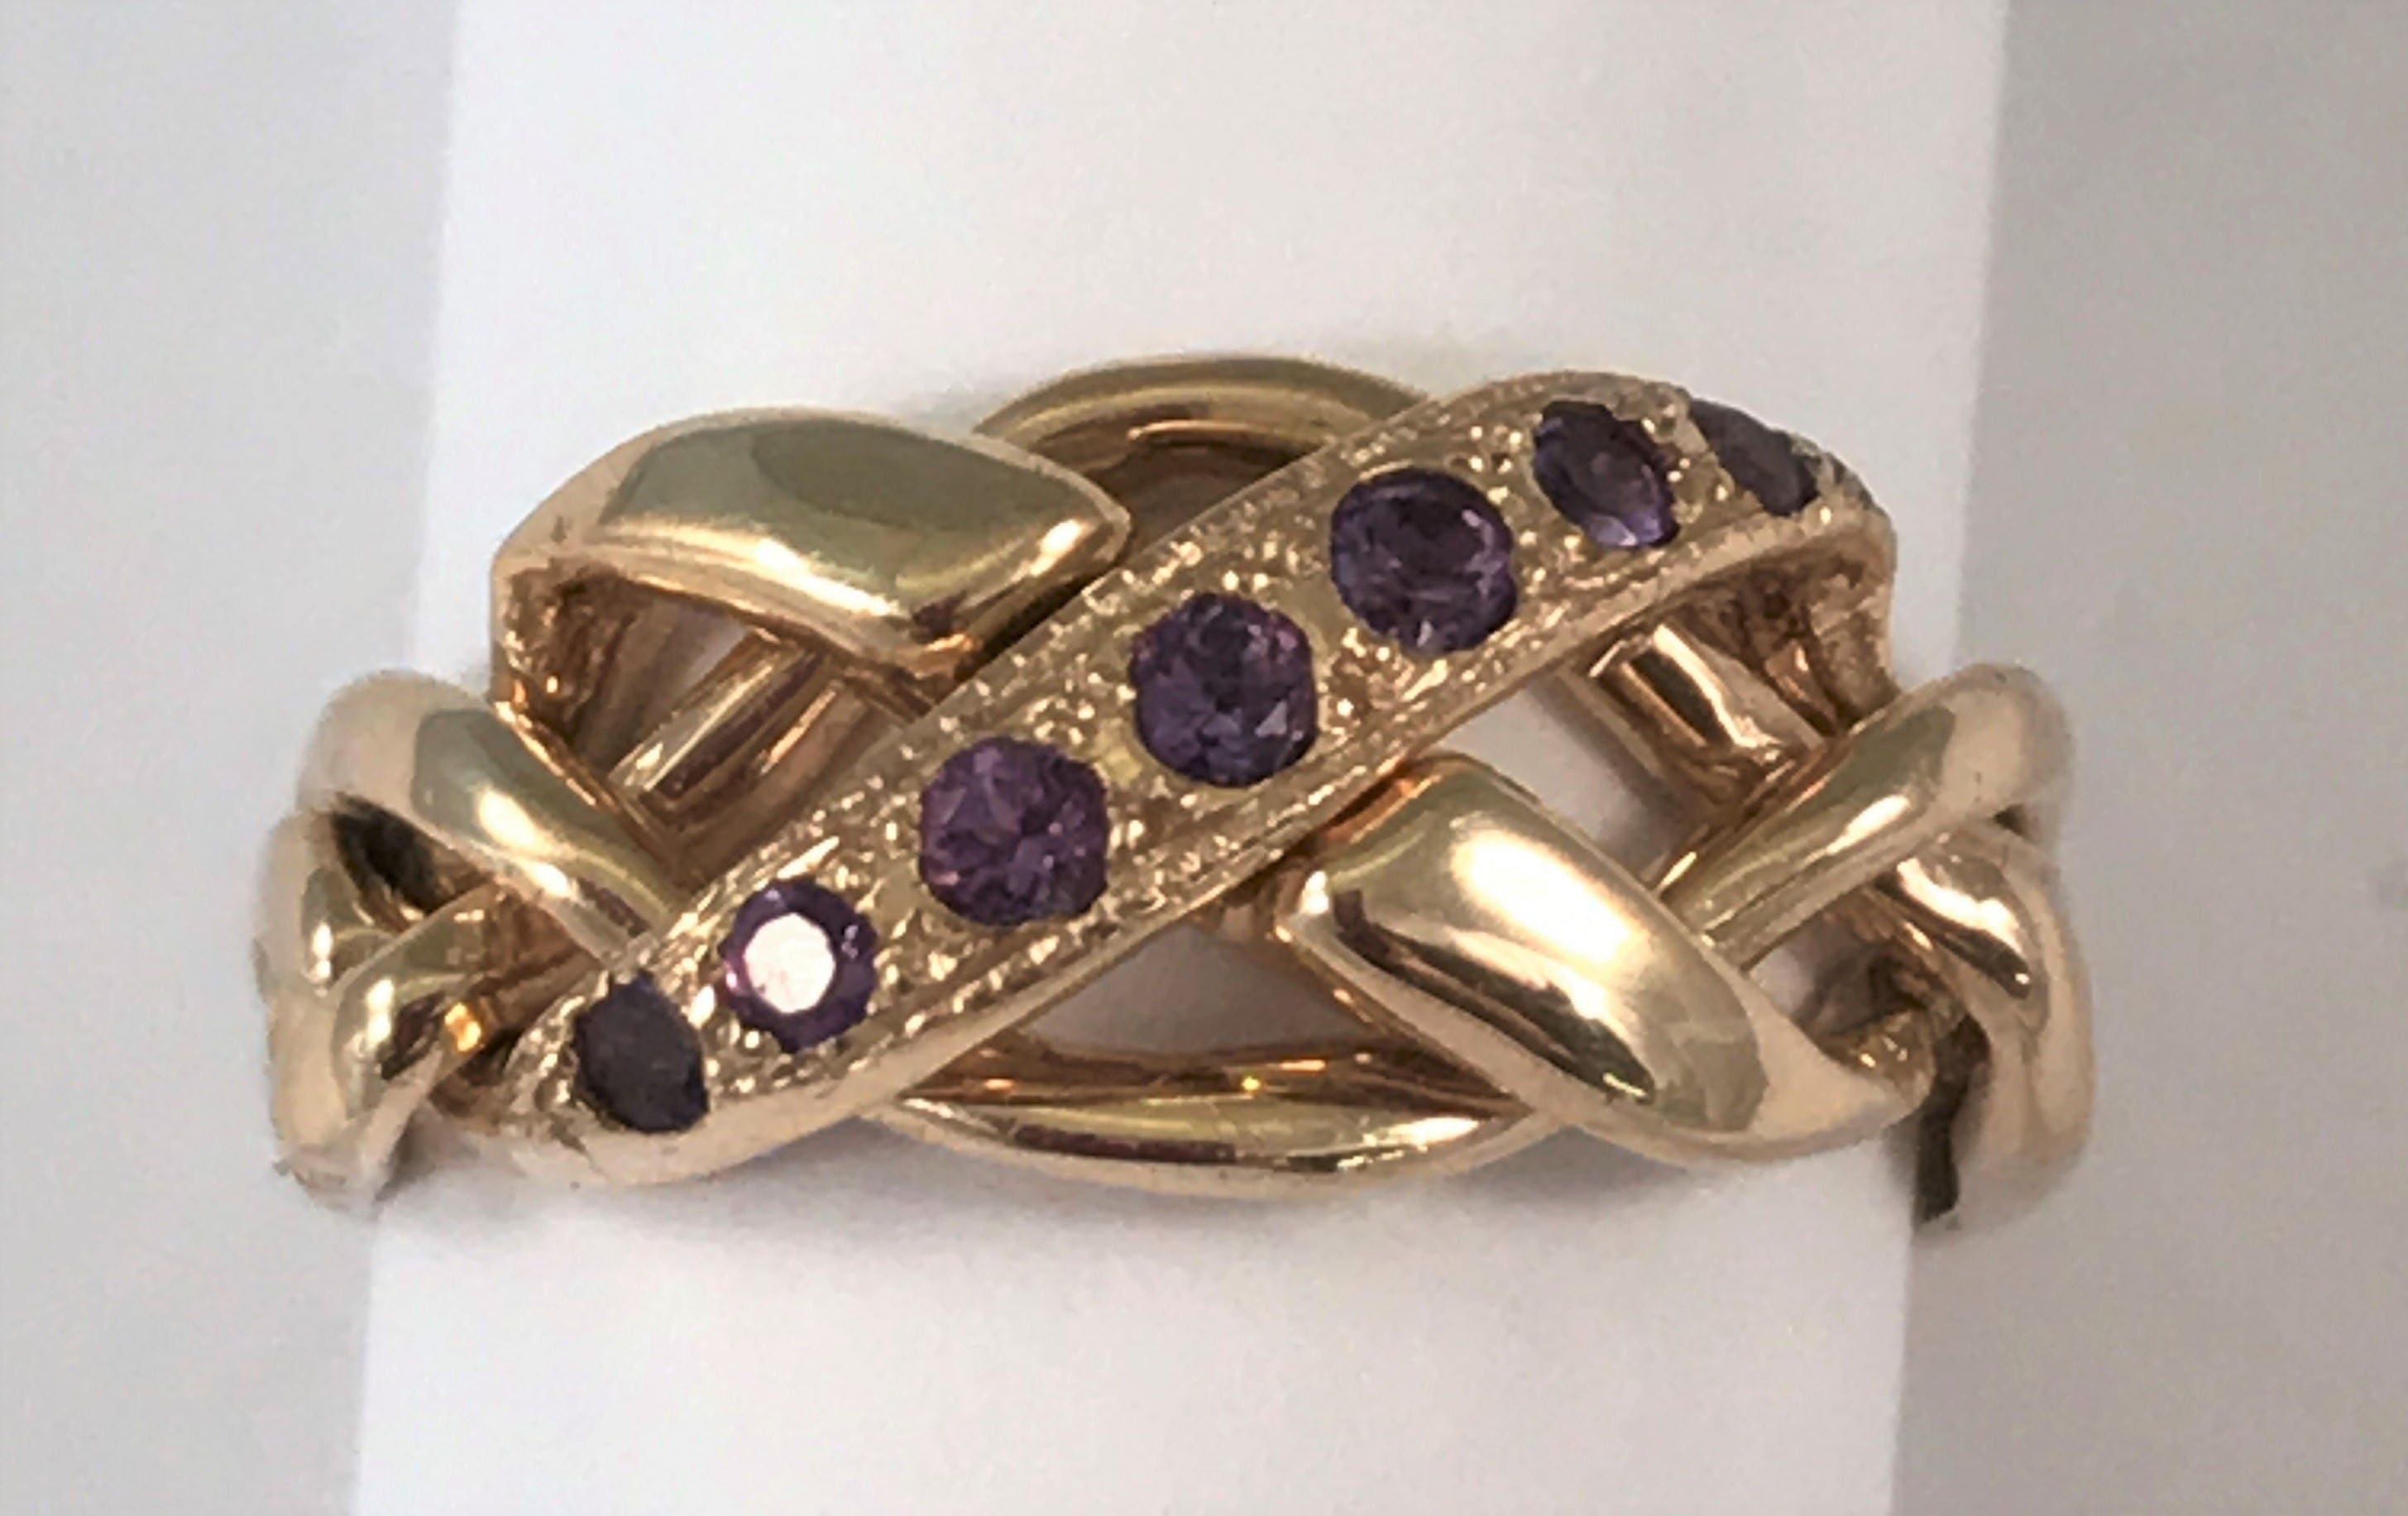 Ladies 4 Band 14k Yellow Gold Puzzle Ring set with Genuine Etsy